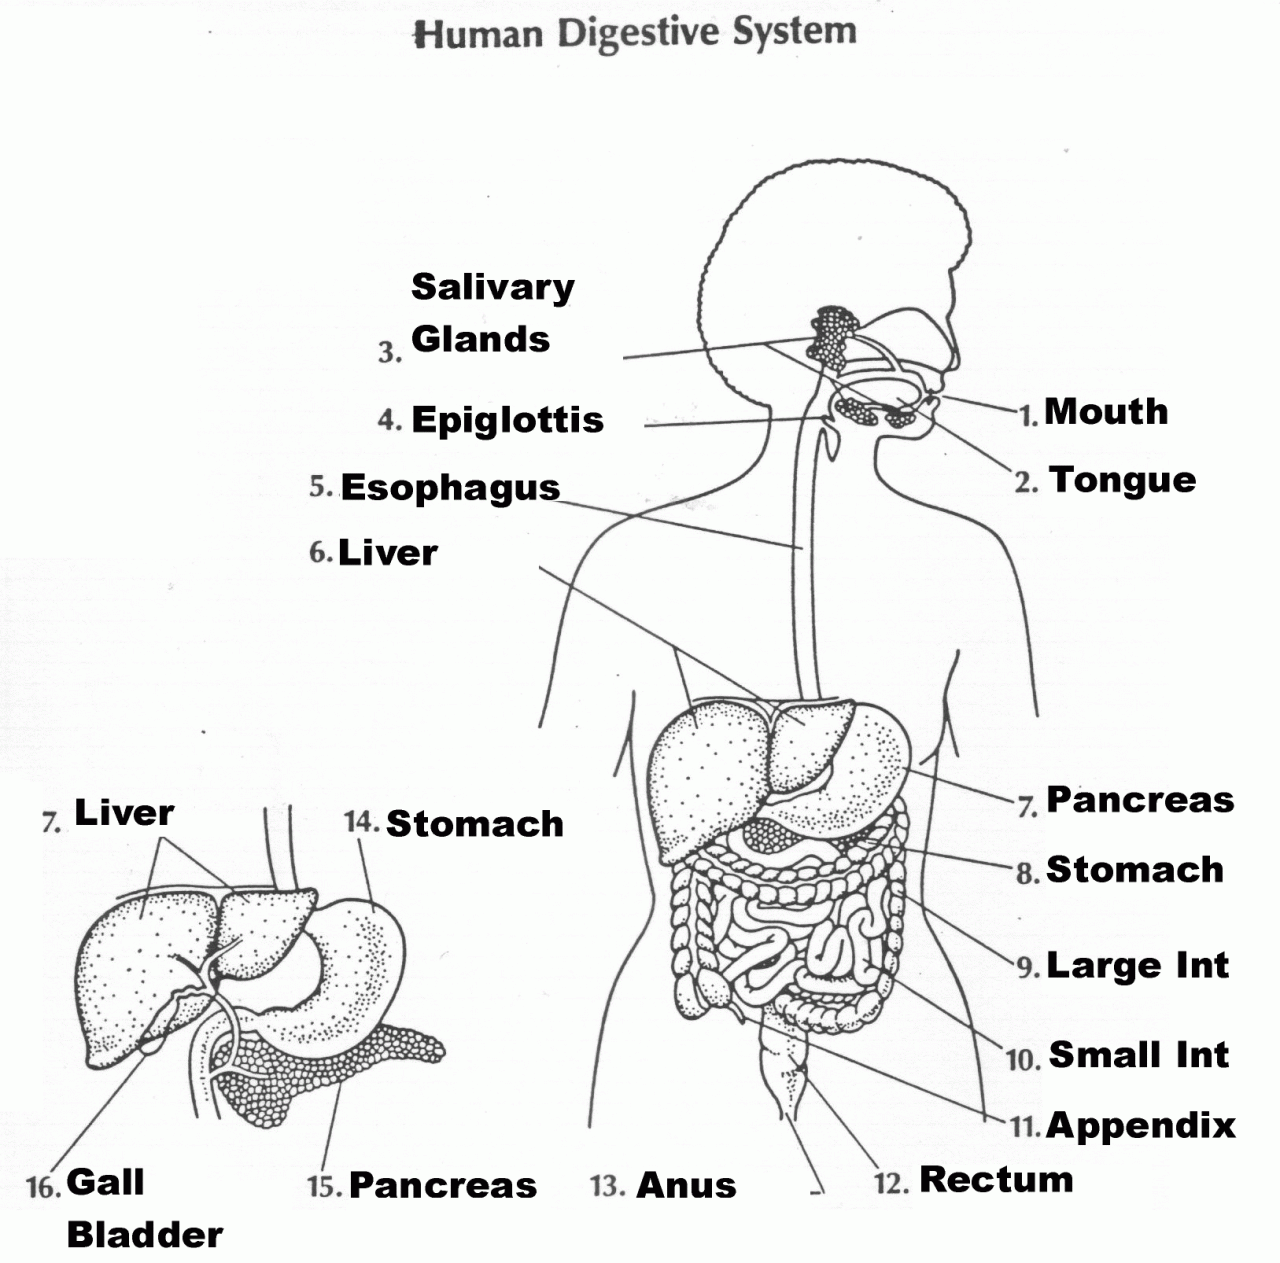 Digestive System Coloring Sheet Answers